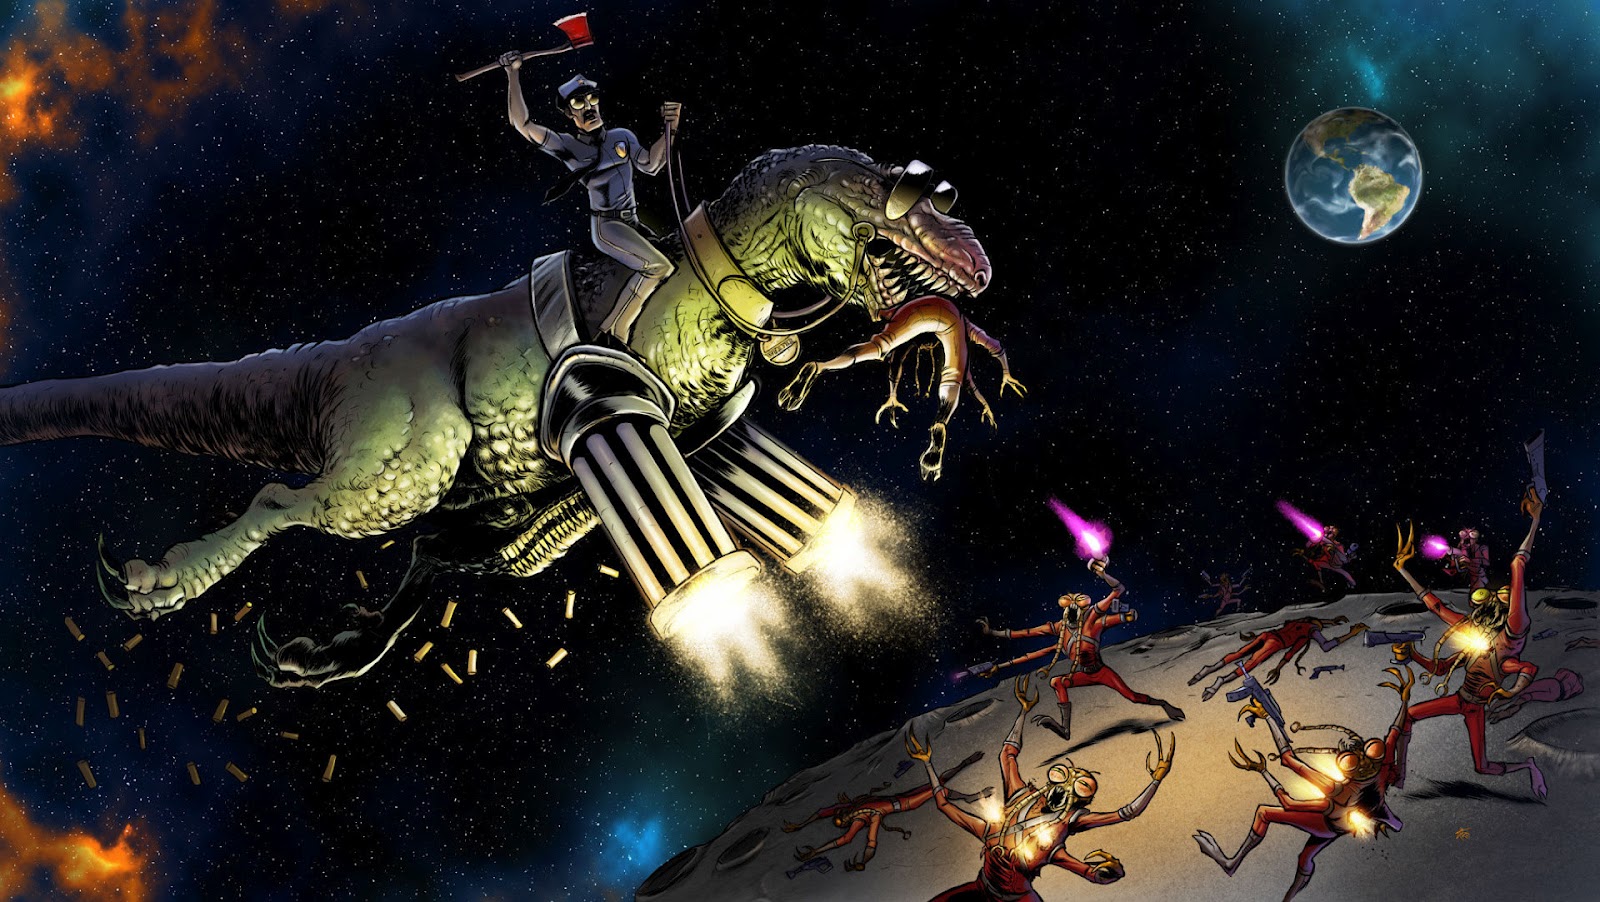 19348_funny_wtf_space_t_rex_shooting_and_eating_aliens.jpg